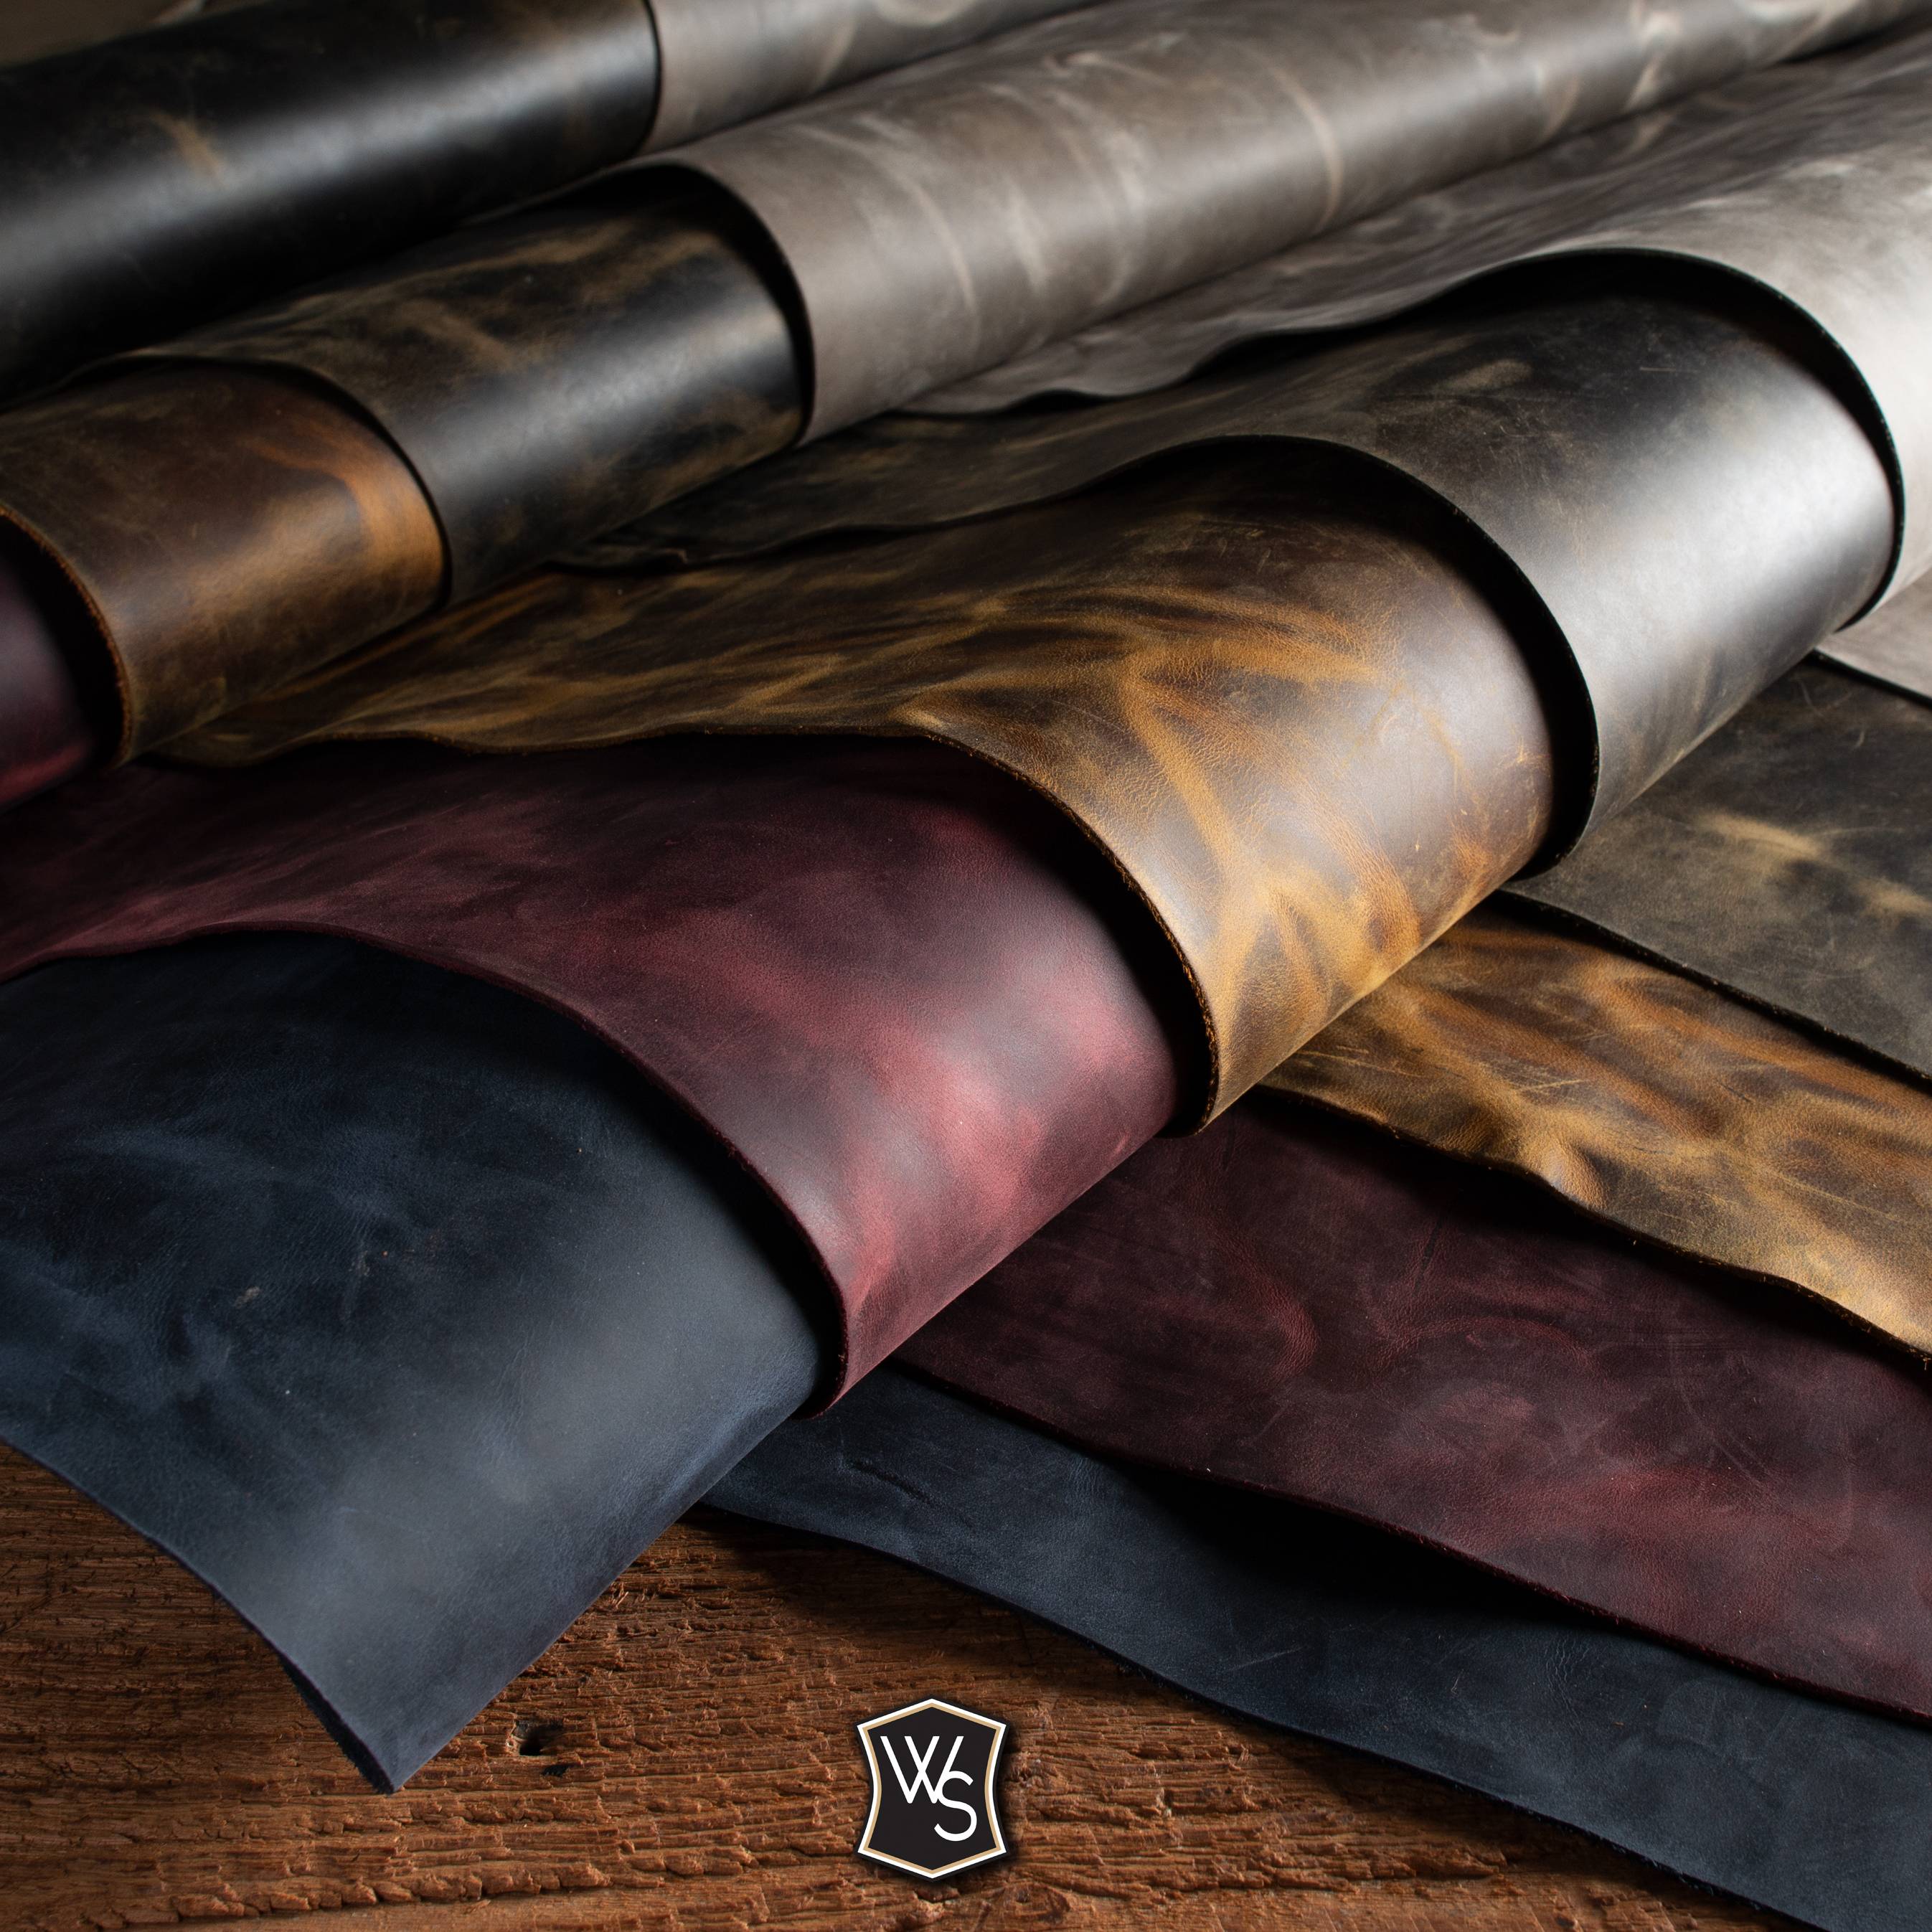 Weaver Leather Supply (@leathersupplies) / X